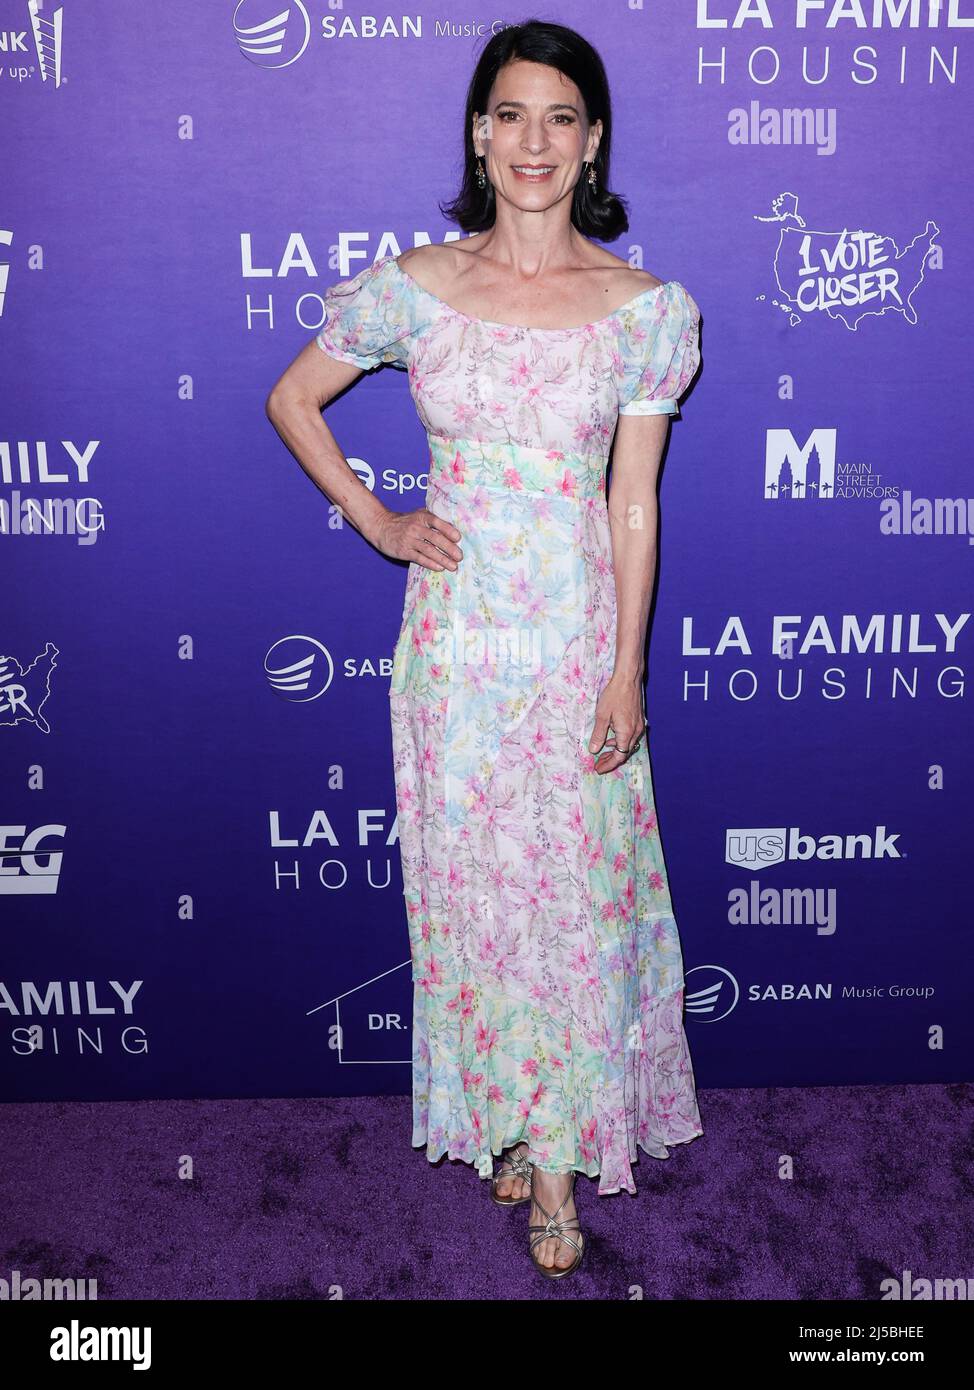 Hollywood, USA. 21st Apr, 2022. WEST HOLLYWOOD, LOS ANGELES, CALIFORNIA, USA - APRIL 21: American film actress Perrey Reeves arrives at the LA Family Housing (LAFH) Awards 2022 held at the Pacific Design Center on April 21, 2022 in West Hollywood, Los Angeles, California, United States. (Photo by Xavier Collin/Image Press Agency) Credit: Image Press Agency/Alamy Live News Stock Photo